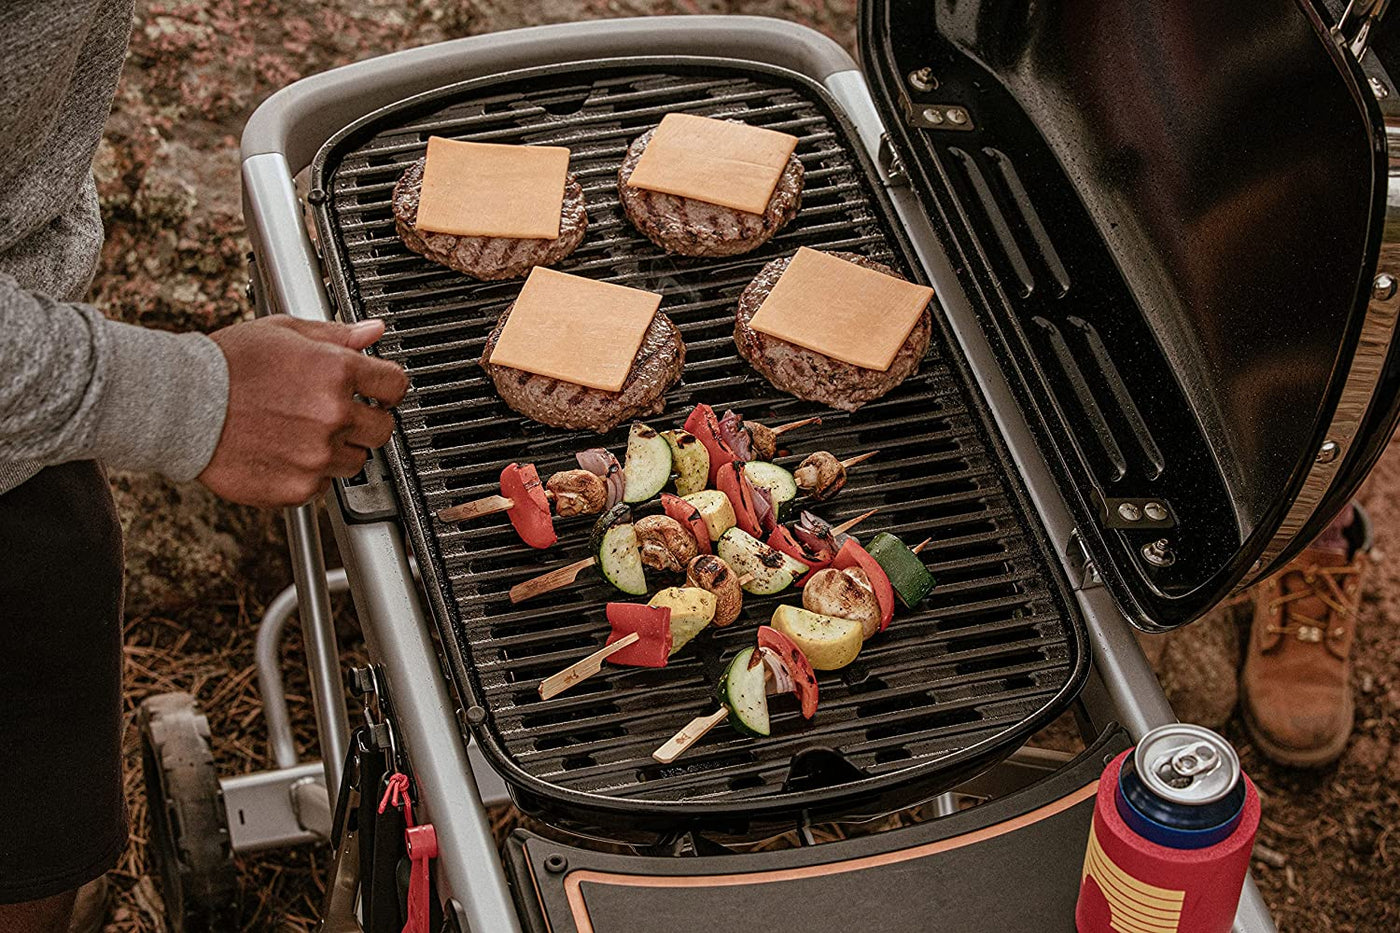 Weber Traveler Gas Barbecue - Stealth Edition